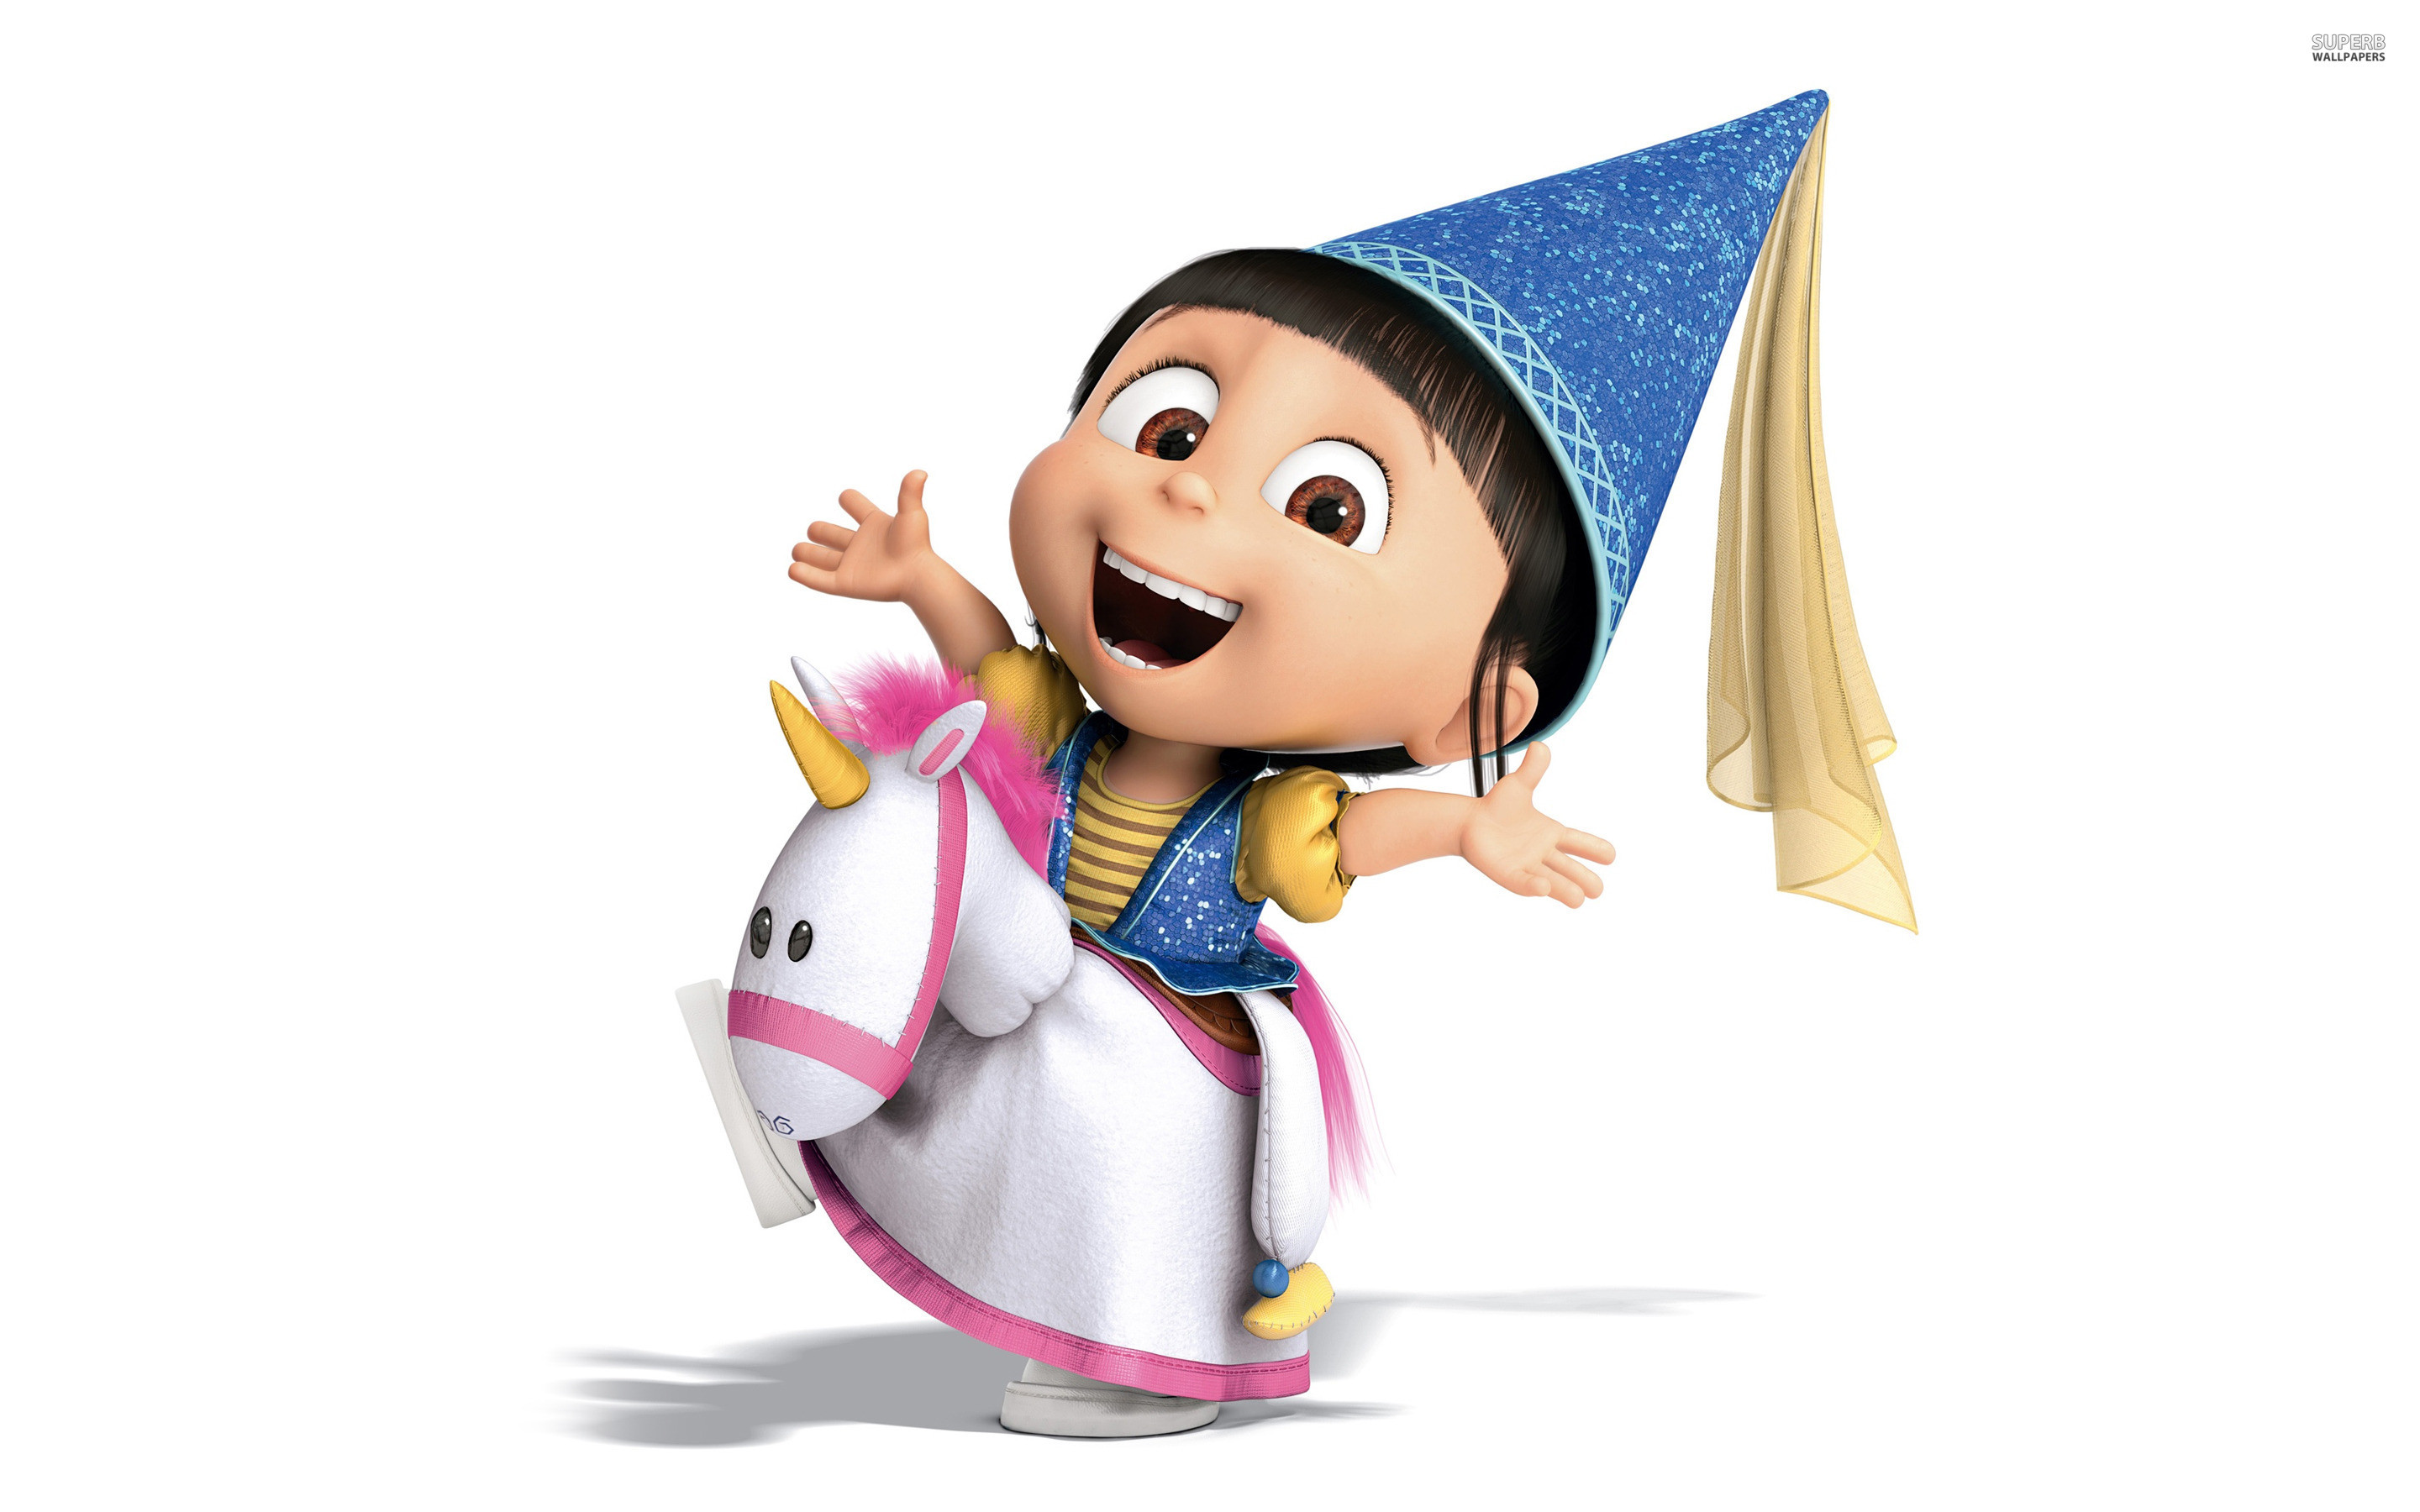 2880x1800 despicable me wallpaper agnes . Free cliparts that you can download .